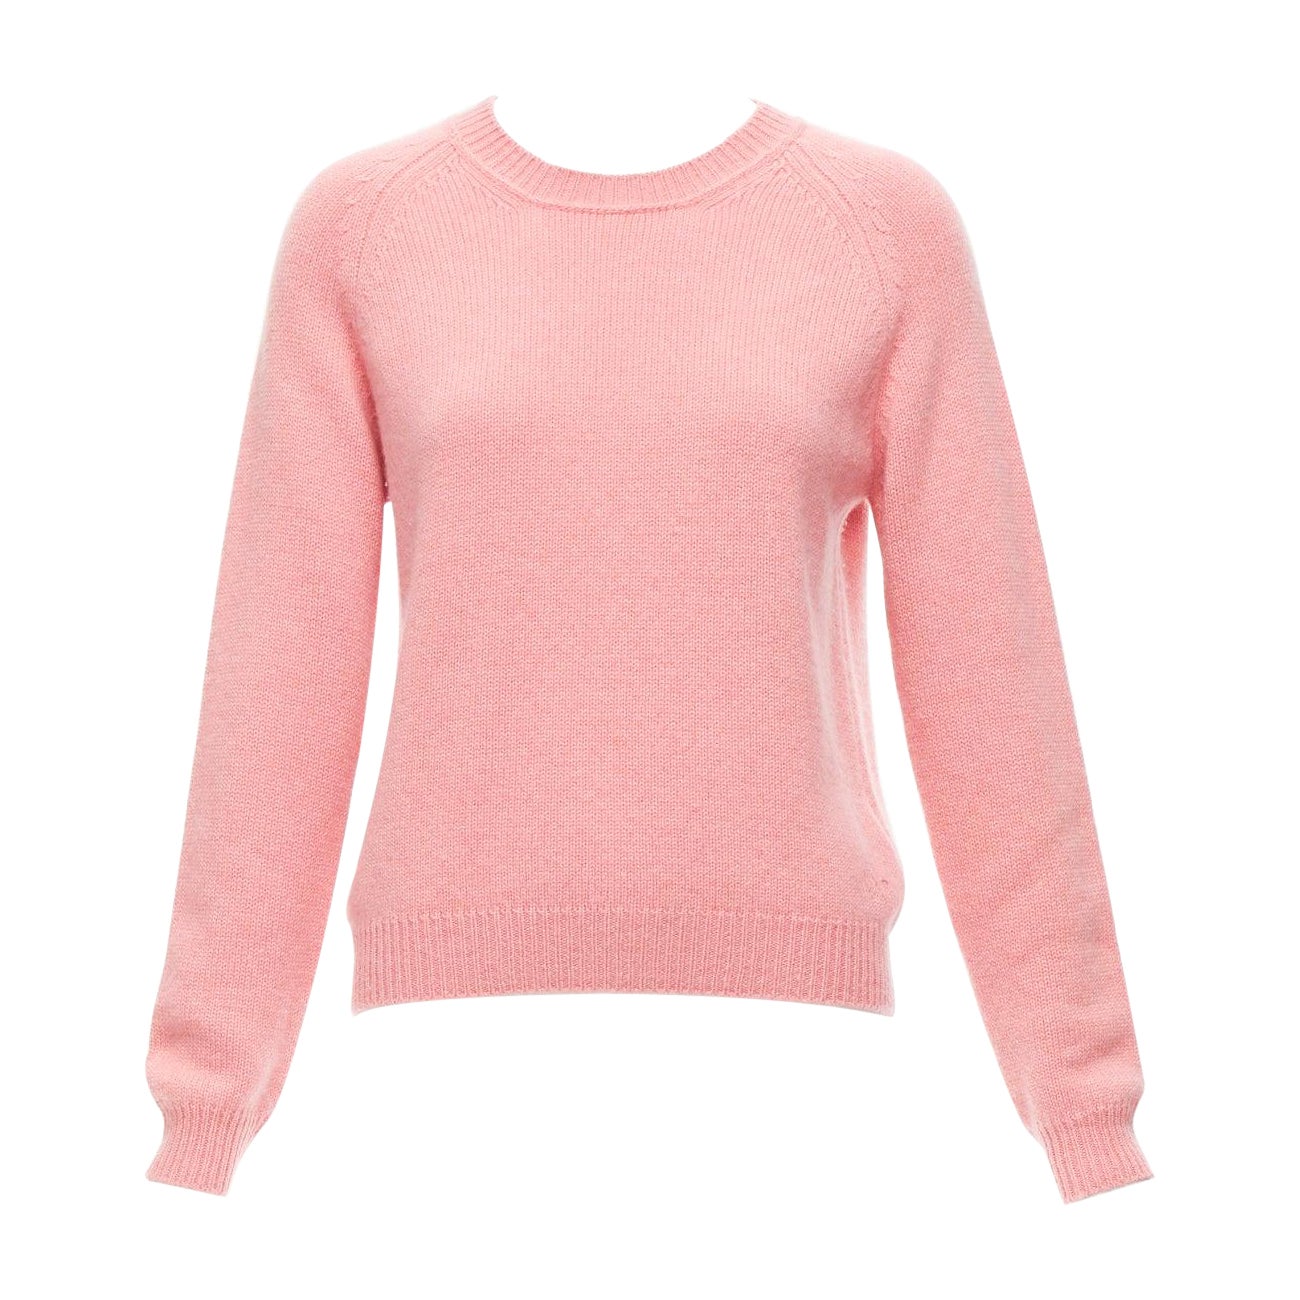 ALEXANDRA GOLOVANOFF Tricot Parisiens 100% cashmere pink long sleeve sweater L For Sale